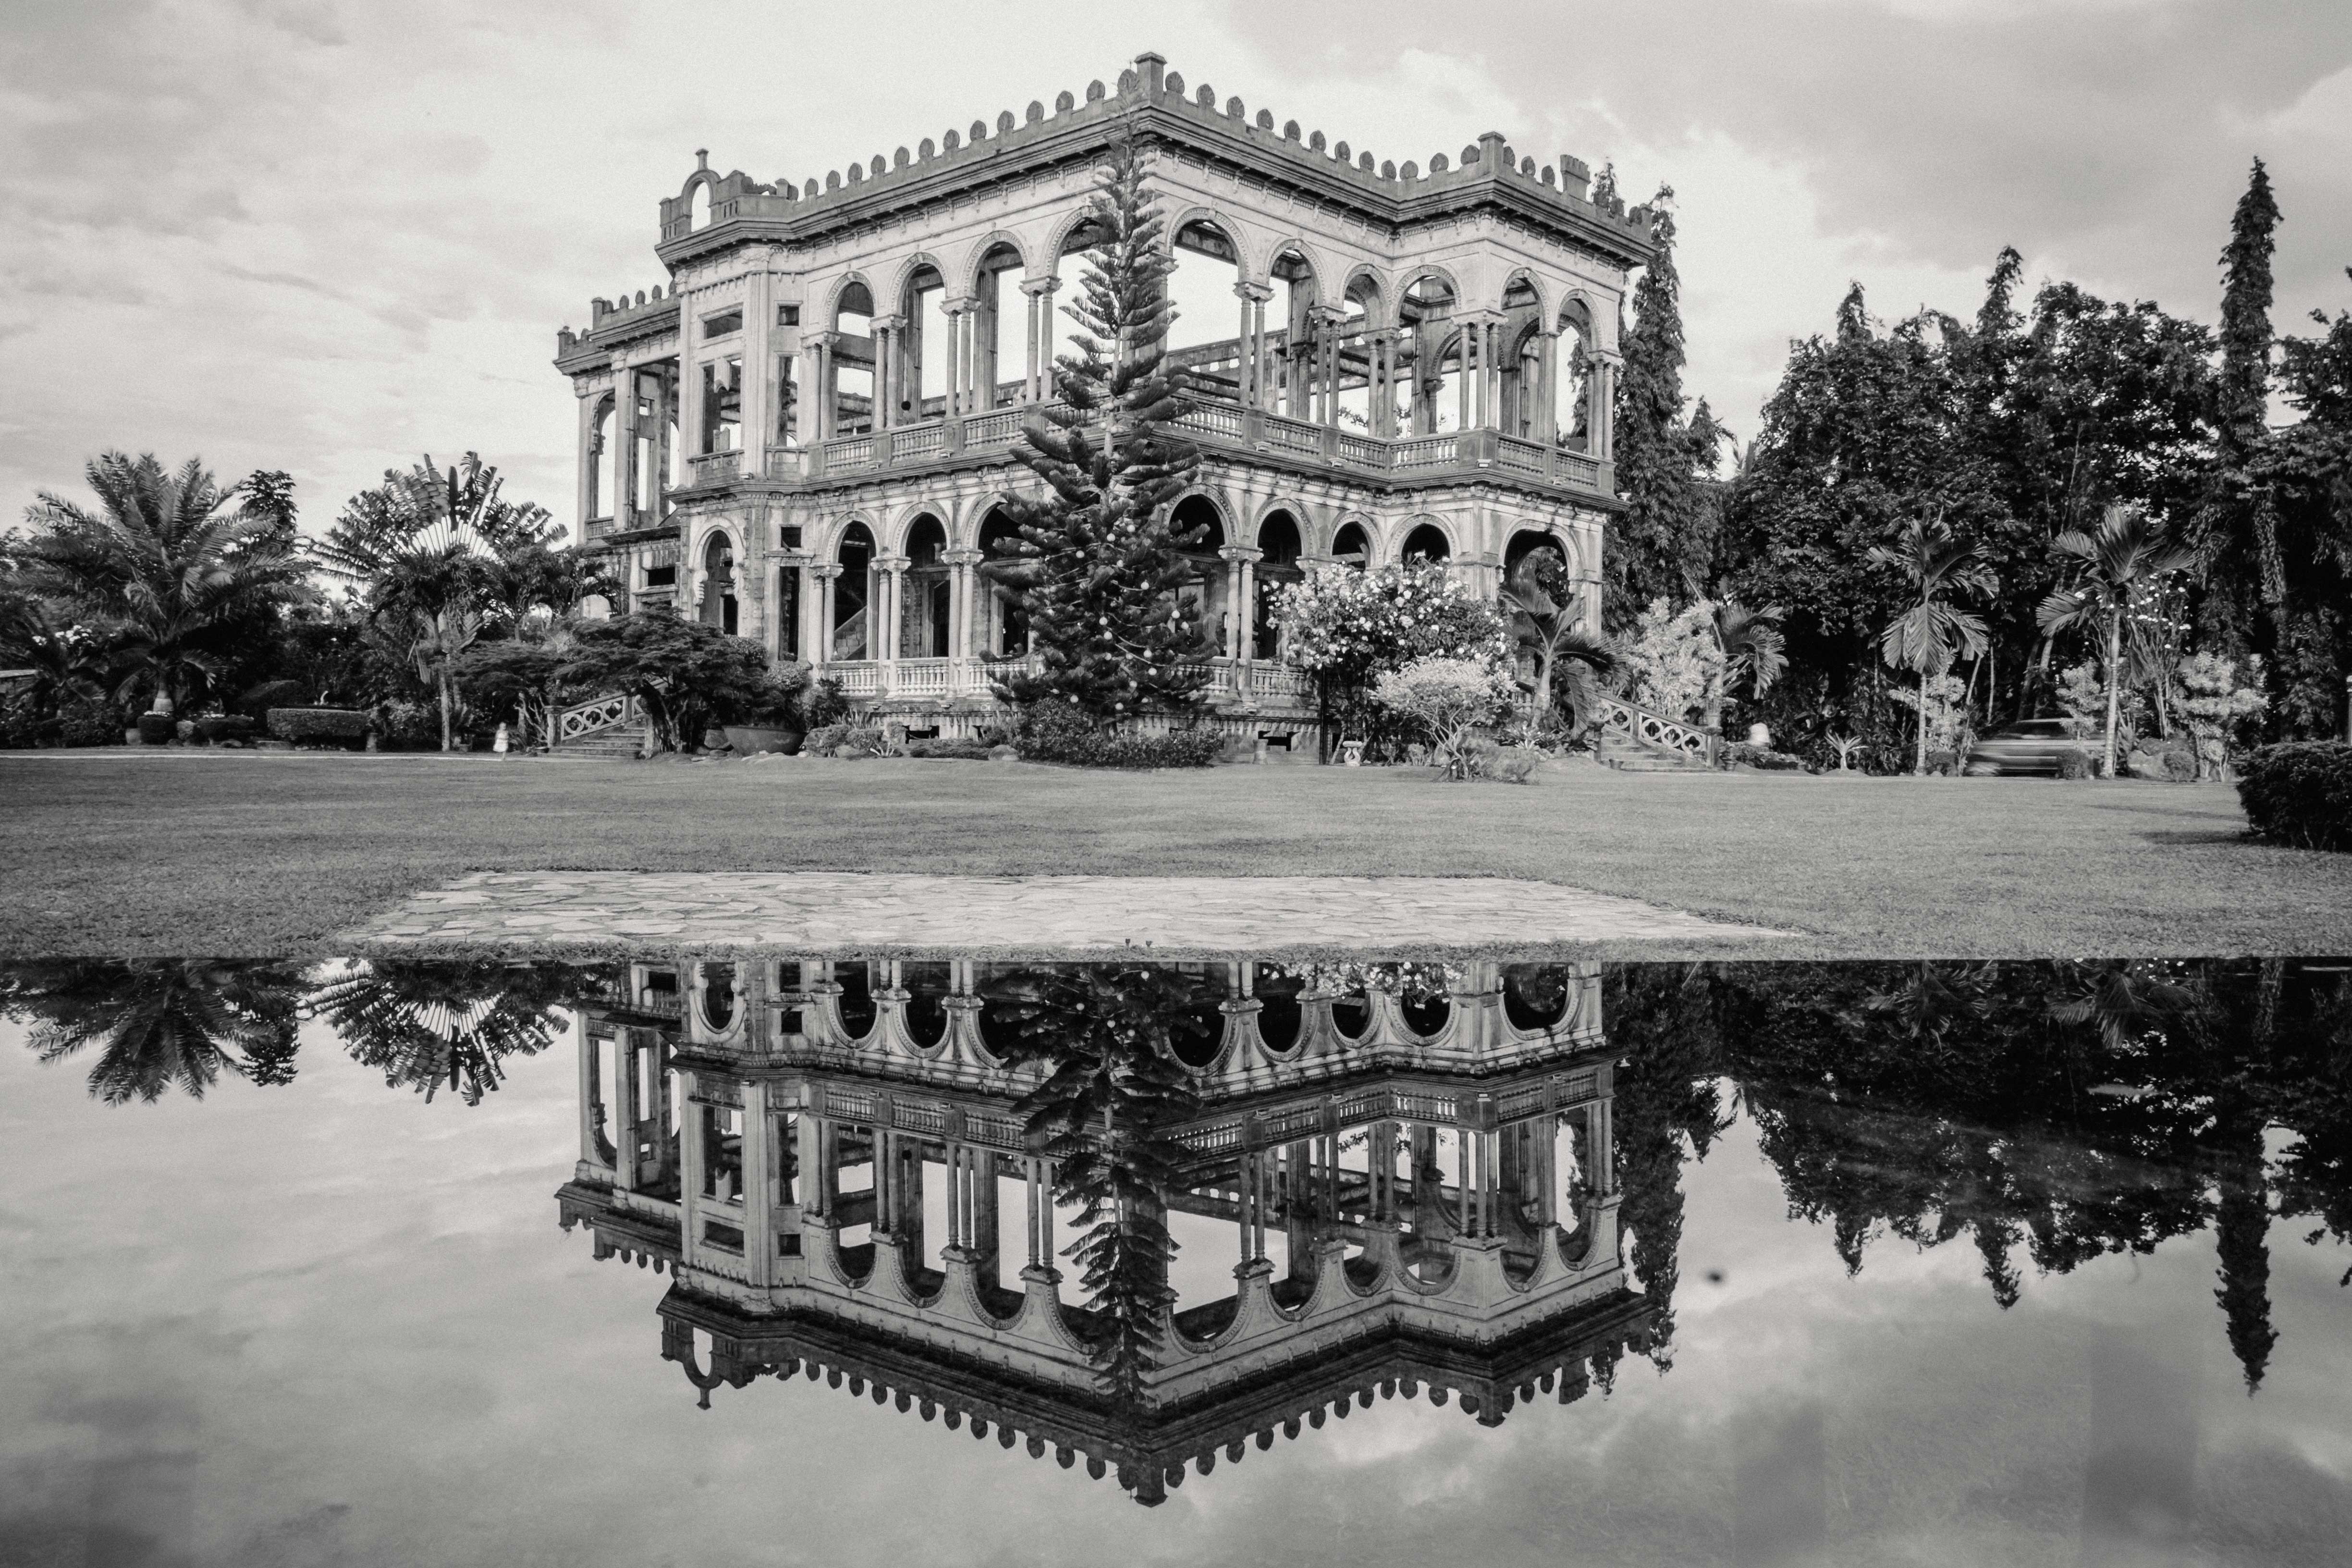 General 4896x3264 architecture monochrome building Philippines palm trees trees ruins water grass field reflection stairs abandoned clouds sky arch jungle film grain